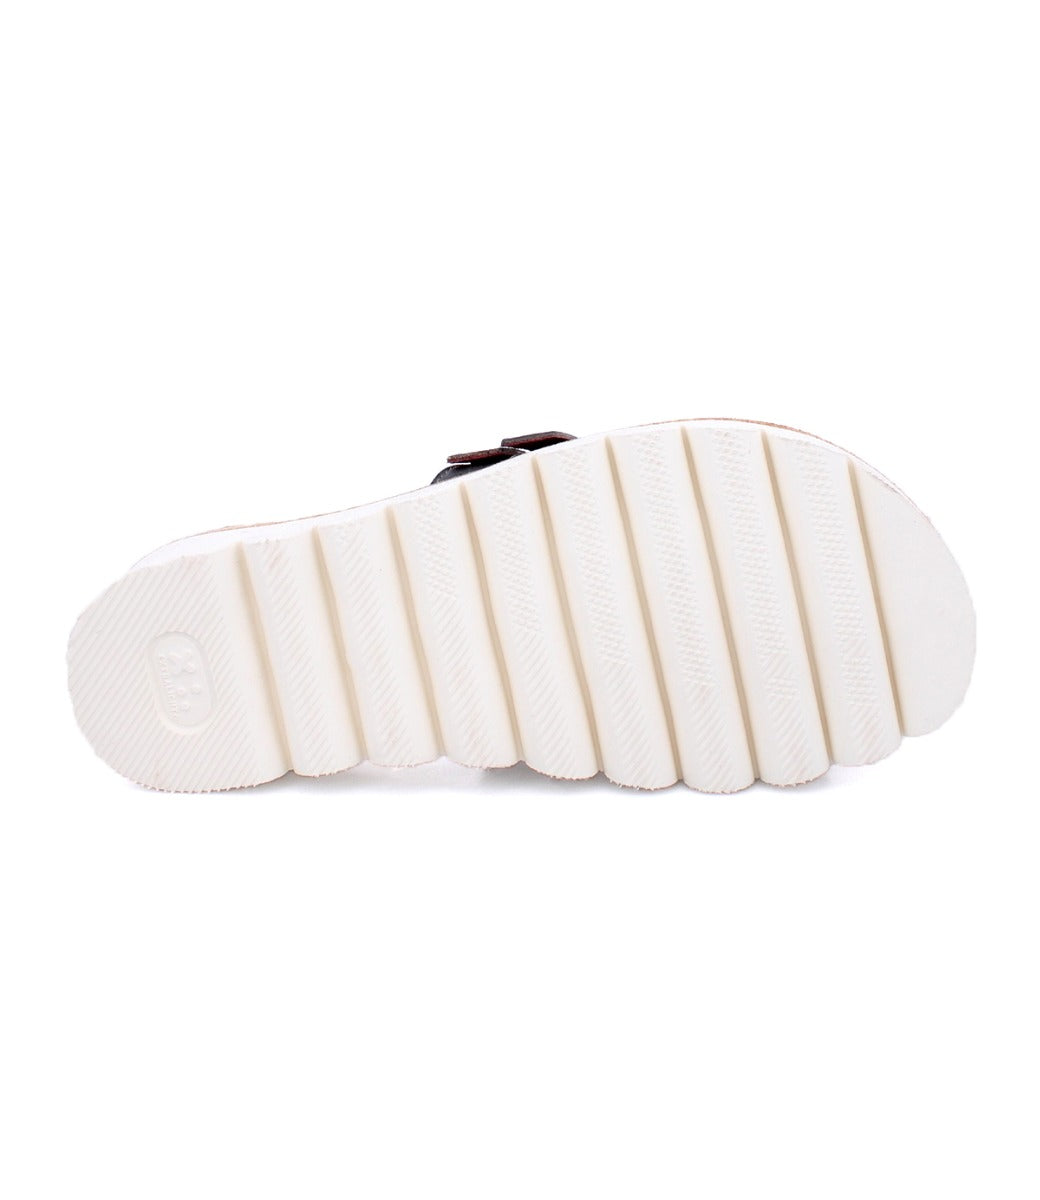 A pair of Bed Stu Holland sandals on a white background.